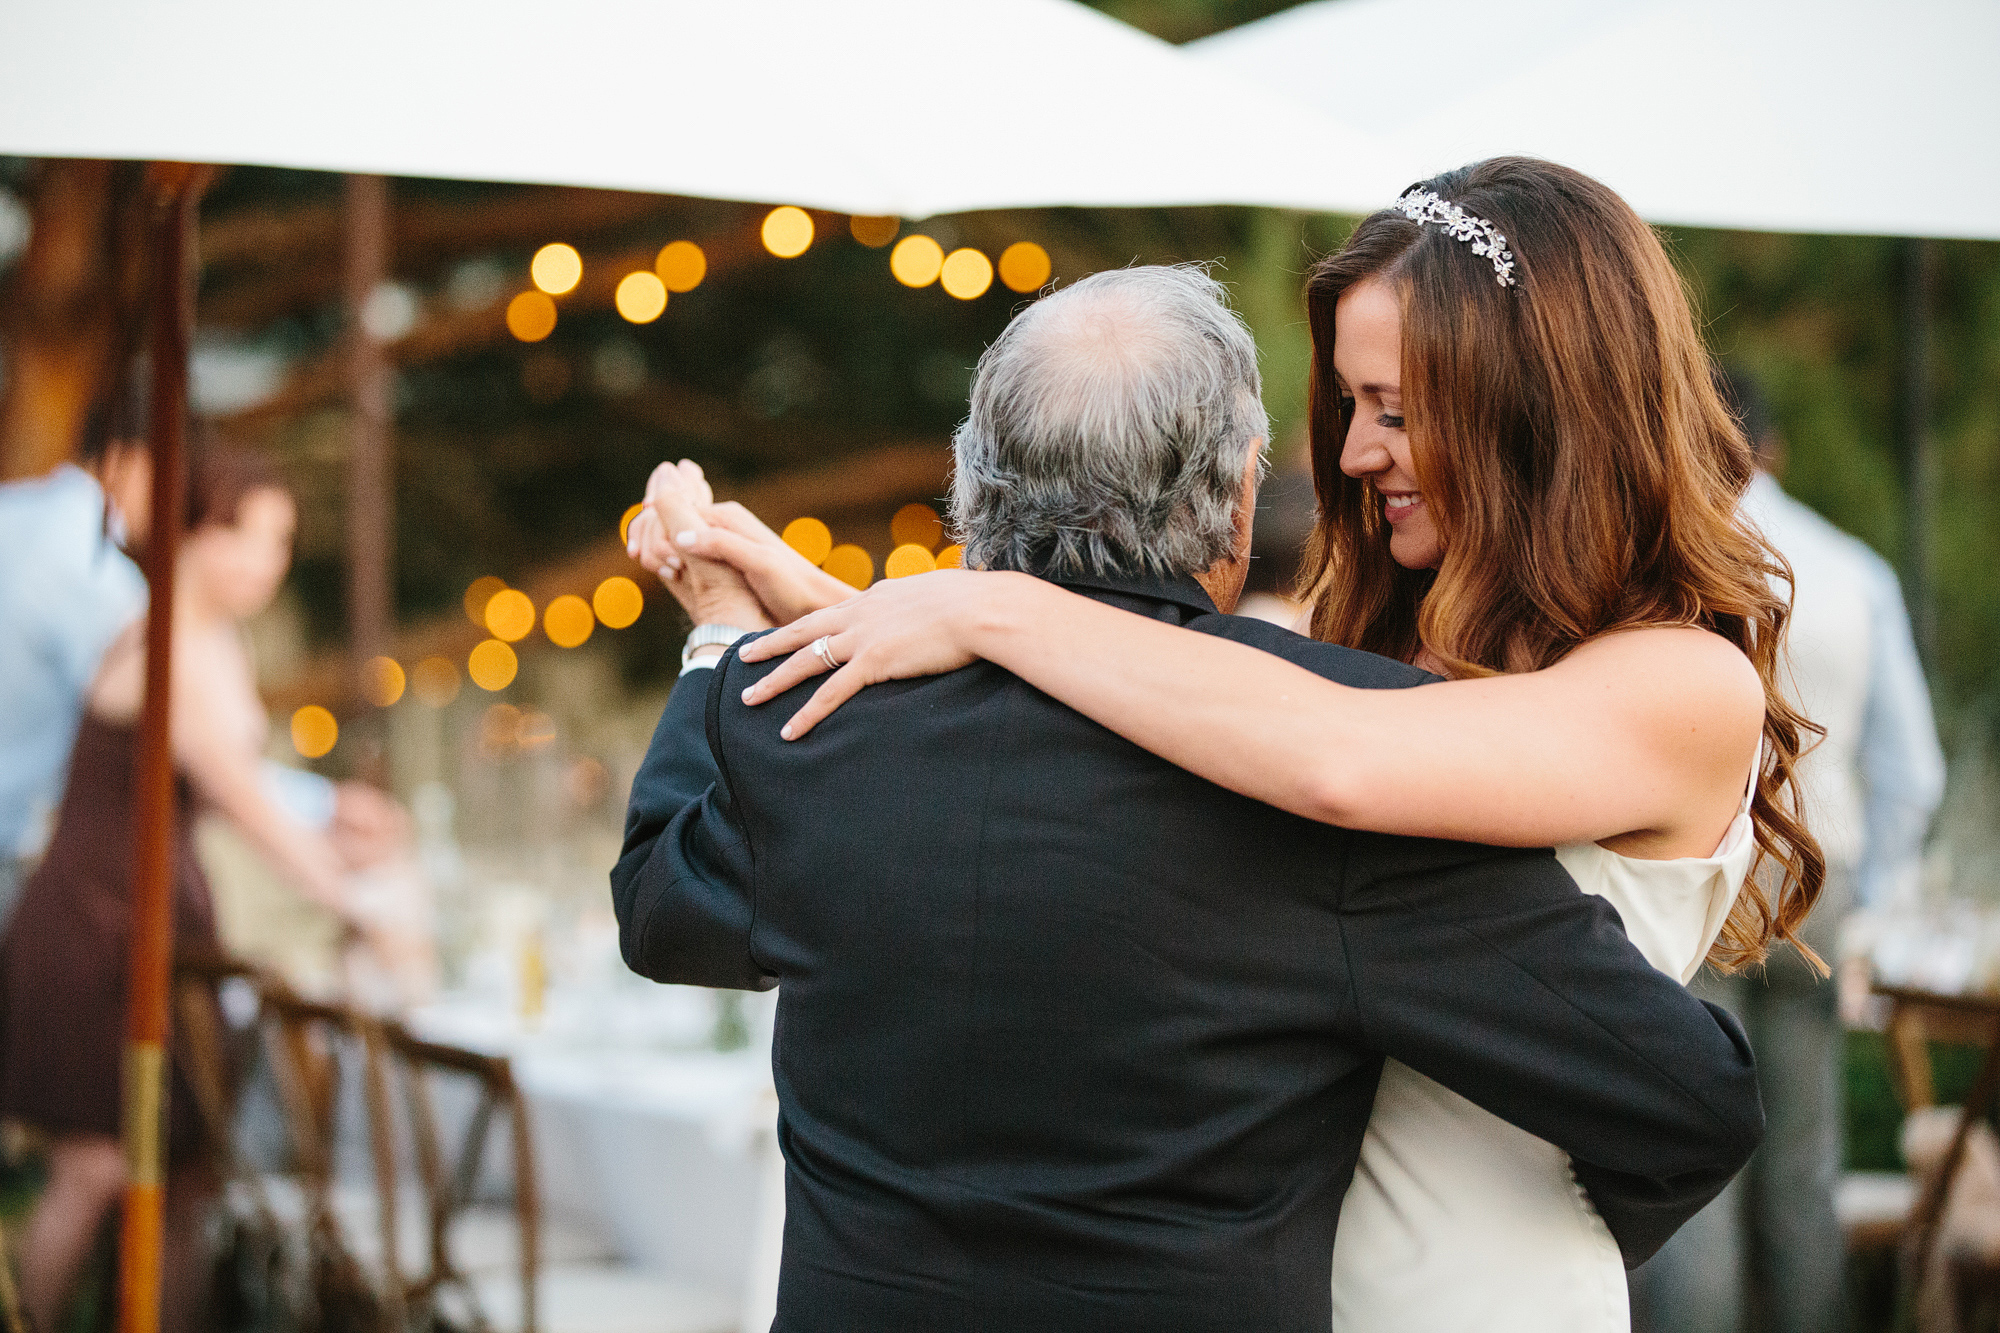 The bride had a special dance with her father. 